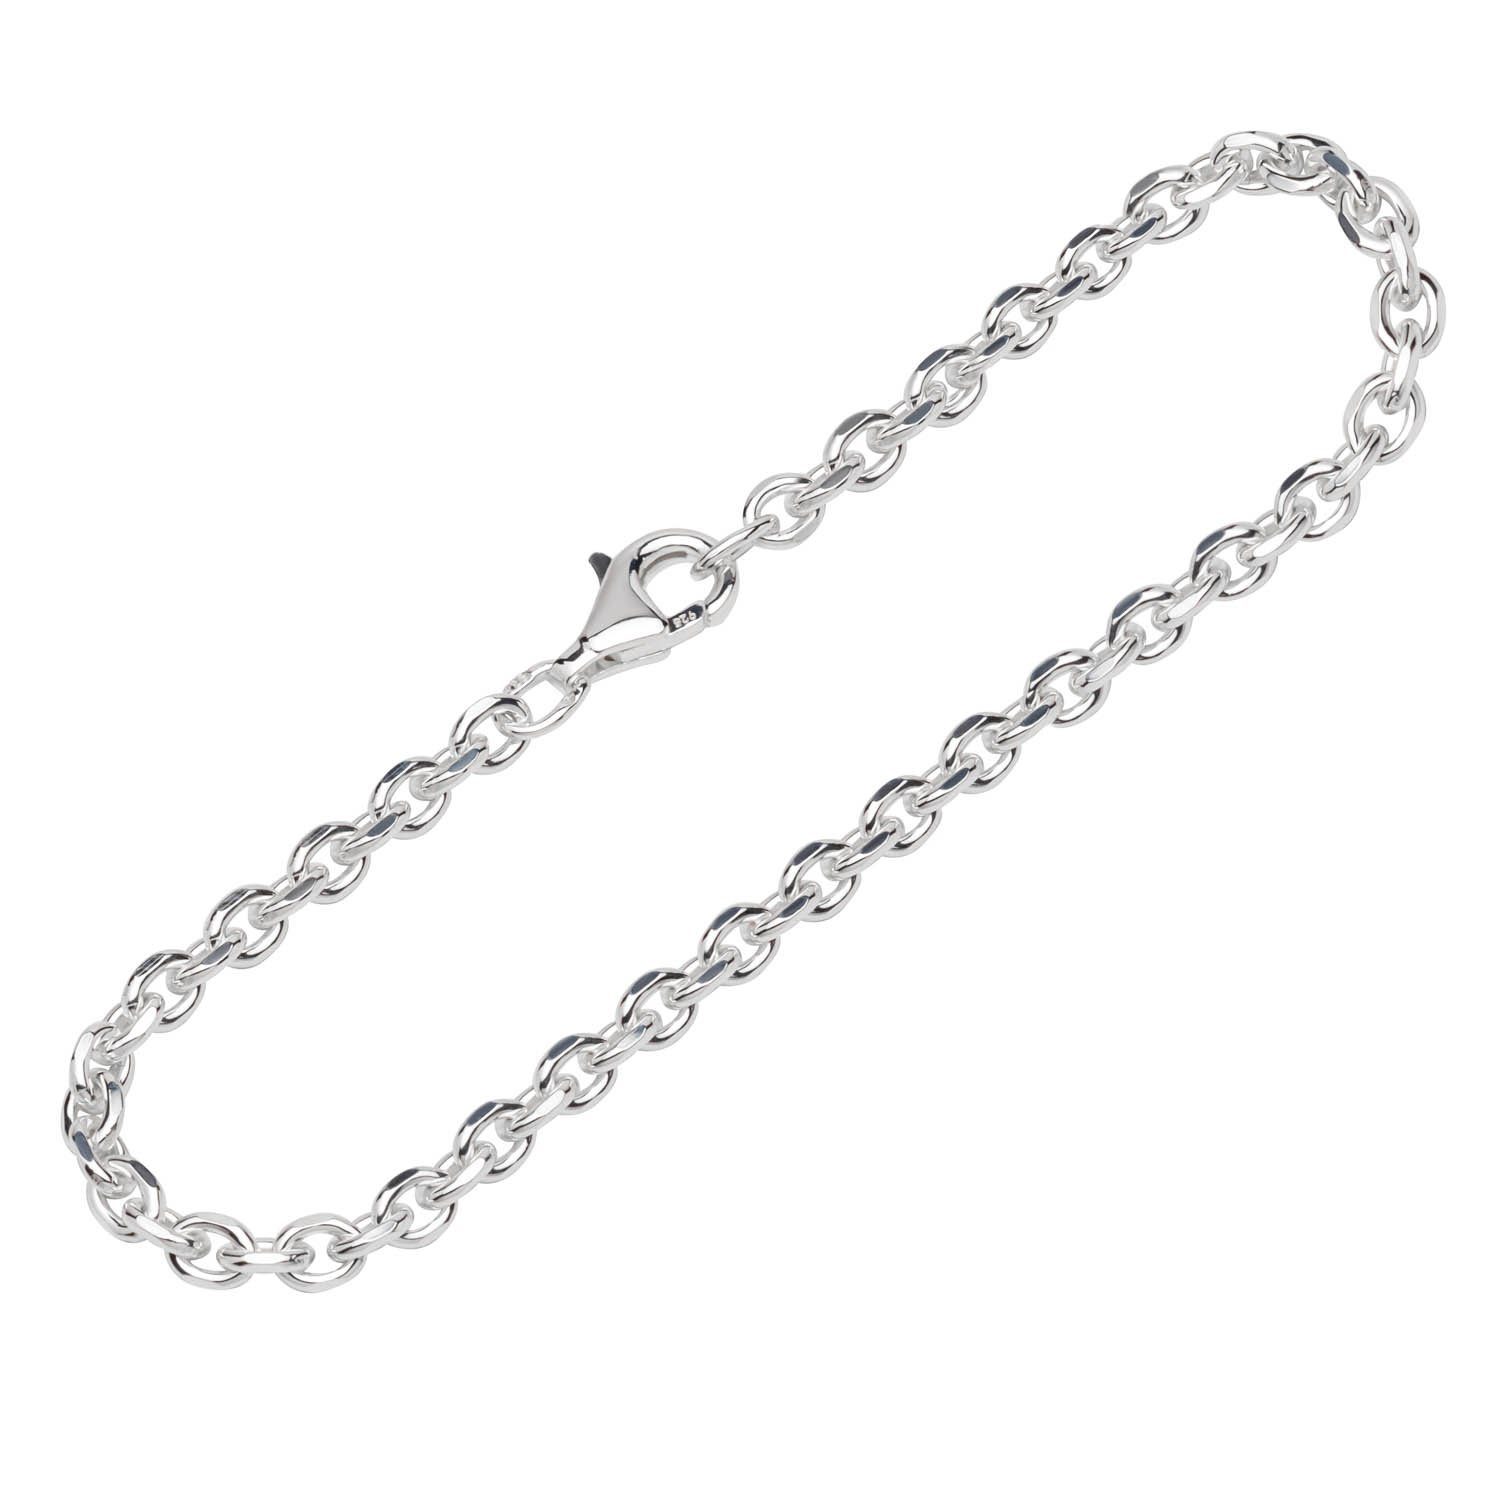 NKlaus Silberarmband Armband 925 Sterling Silber 19cm Ankerkette 4 fach (1 Stück), Made in Germany